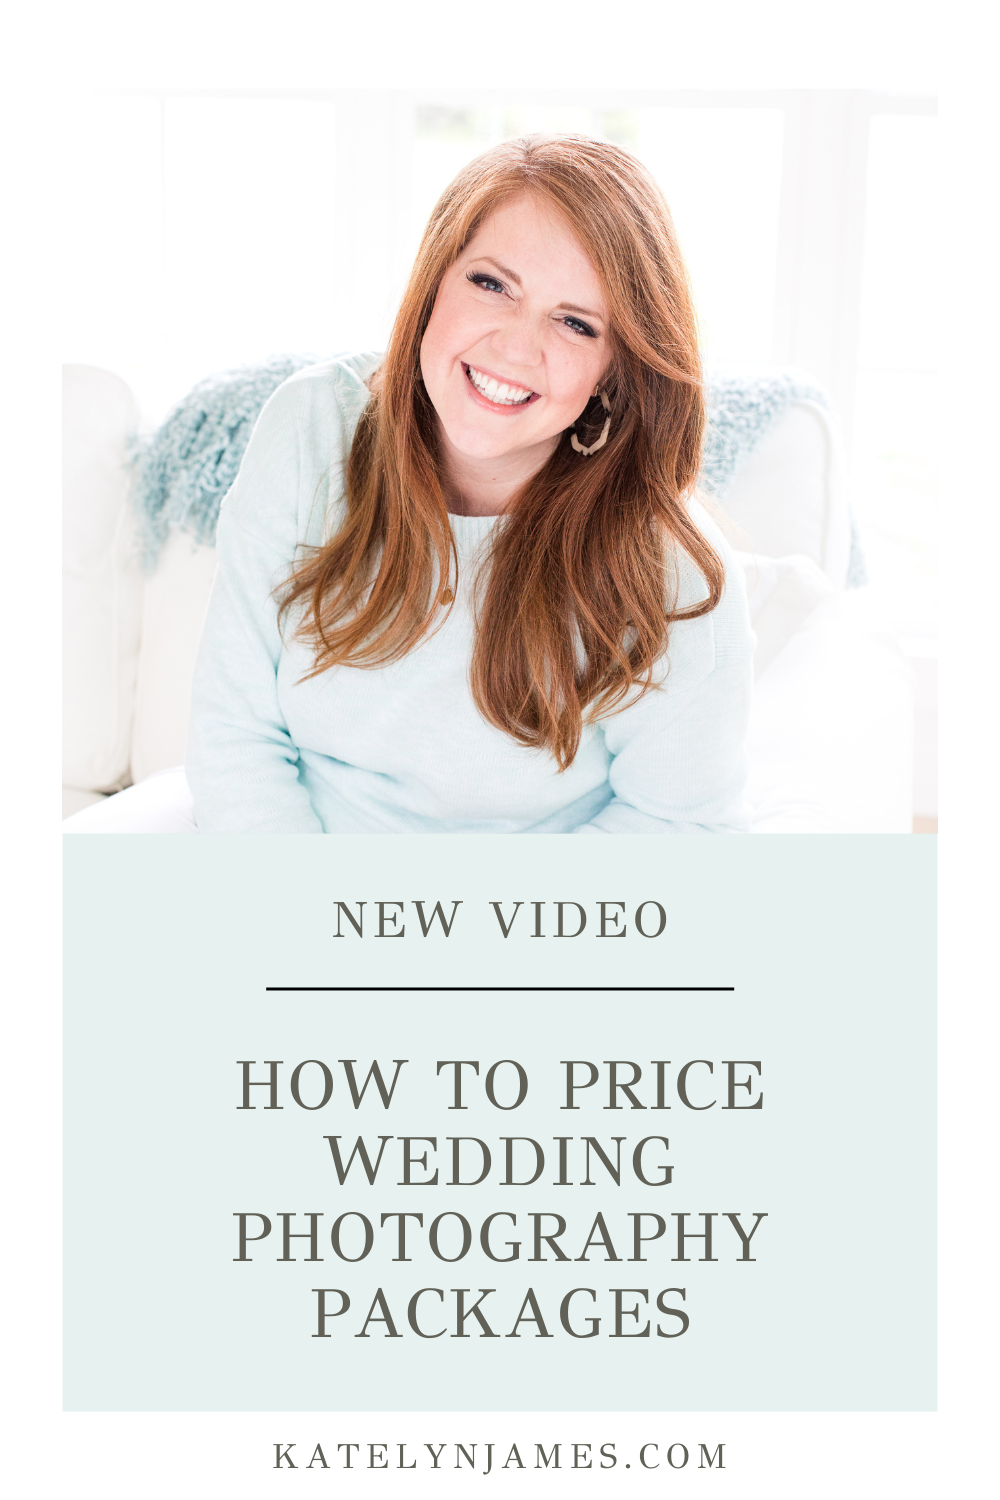 How to Price Wedding Packages